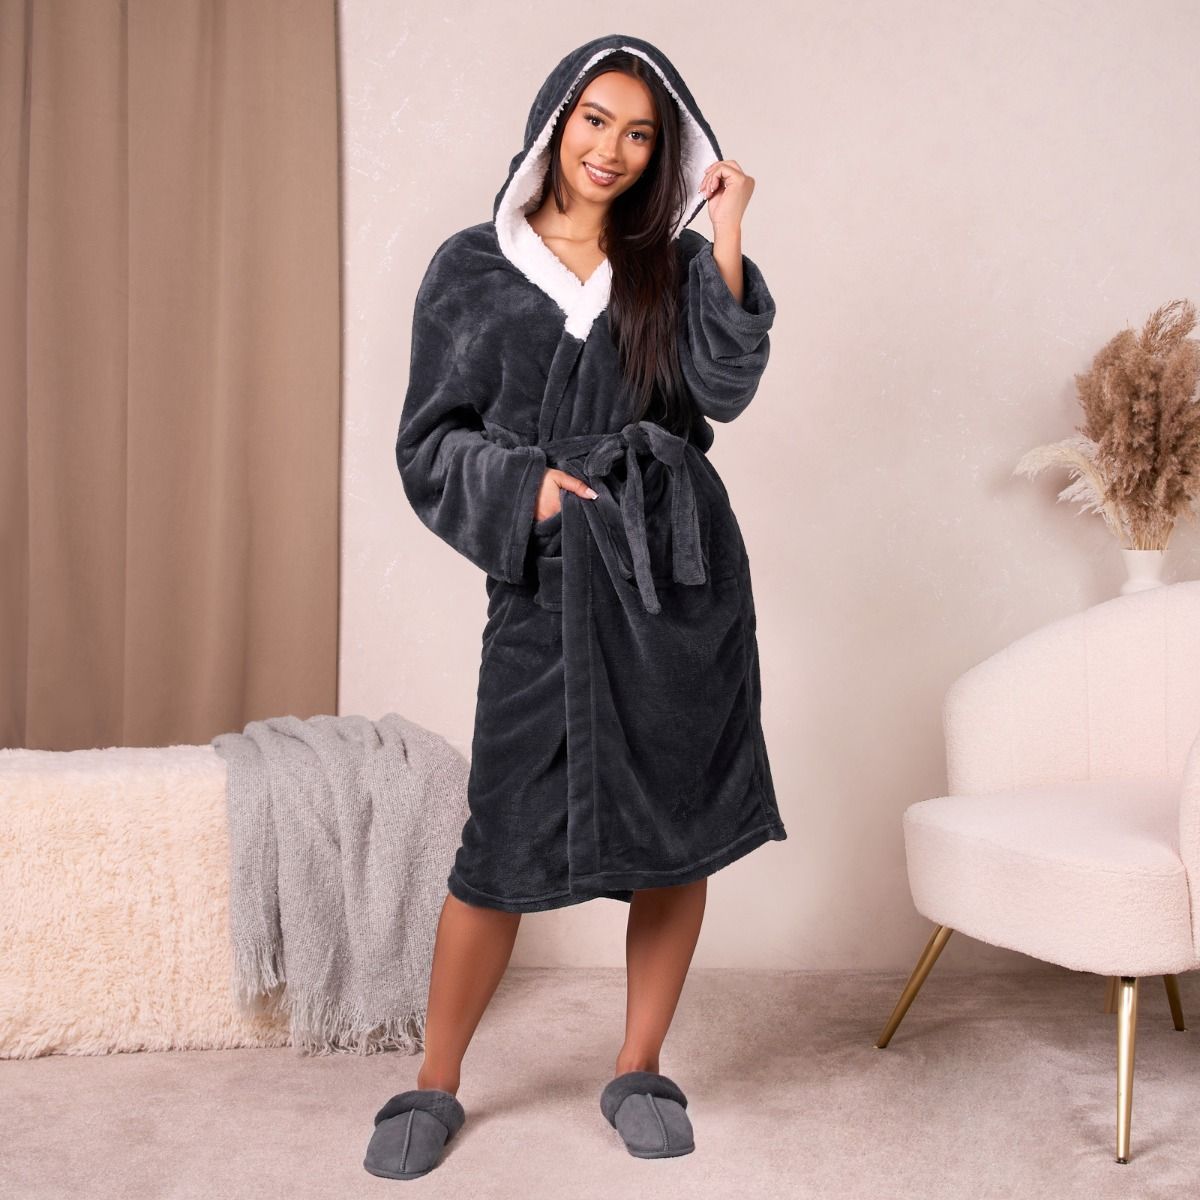 Lulabay mens personalised premium hooded contrast dressing gown